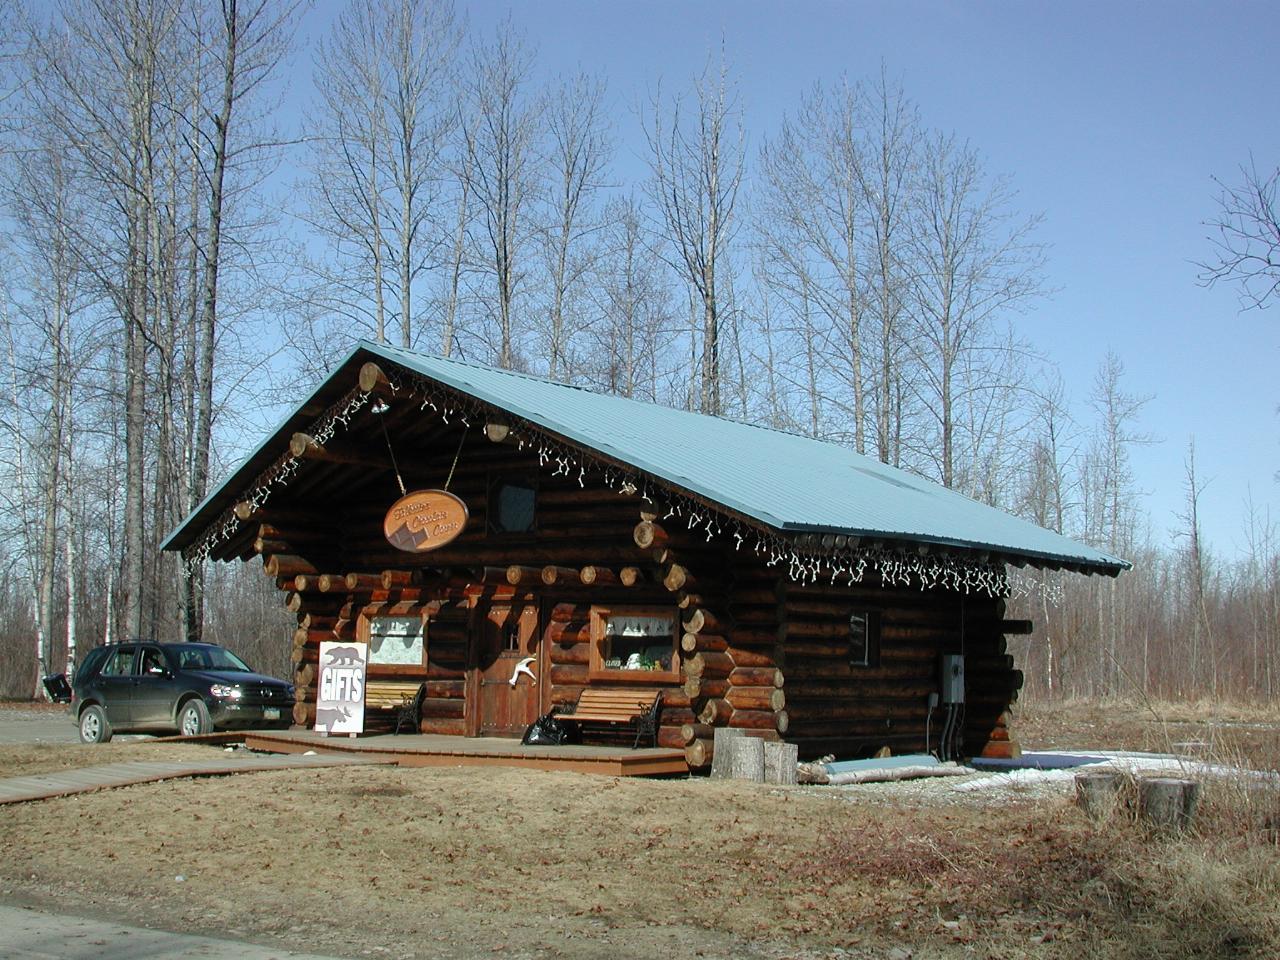 Another tourist attraction in Talkeetna